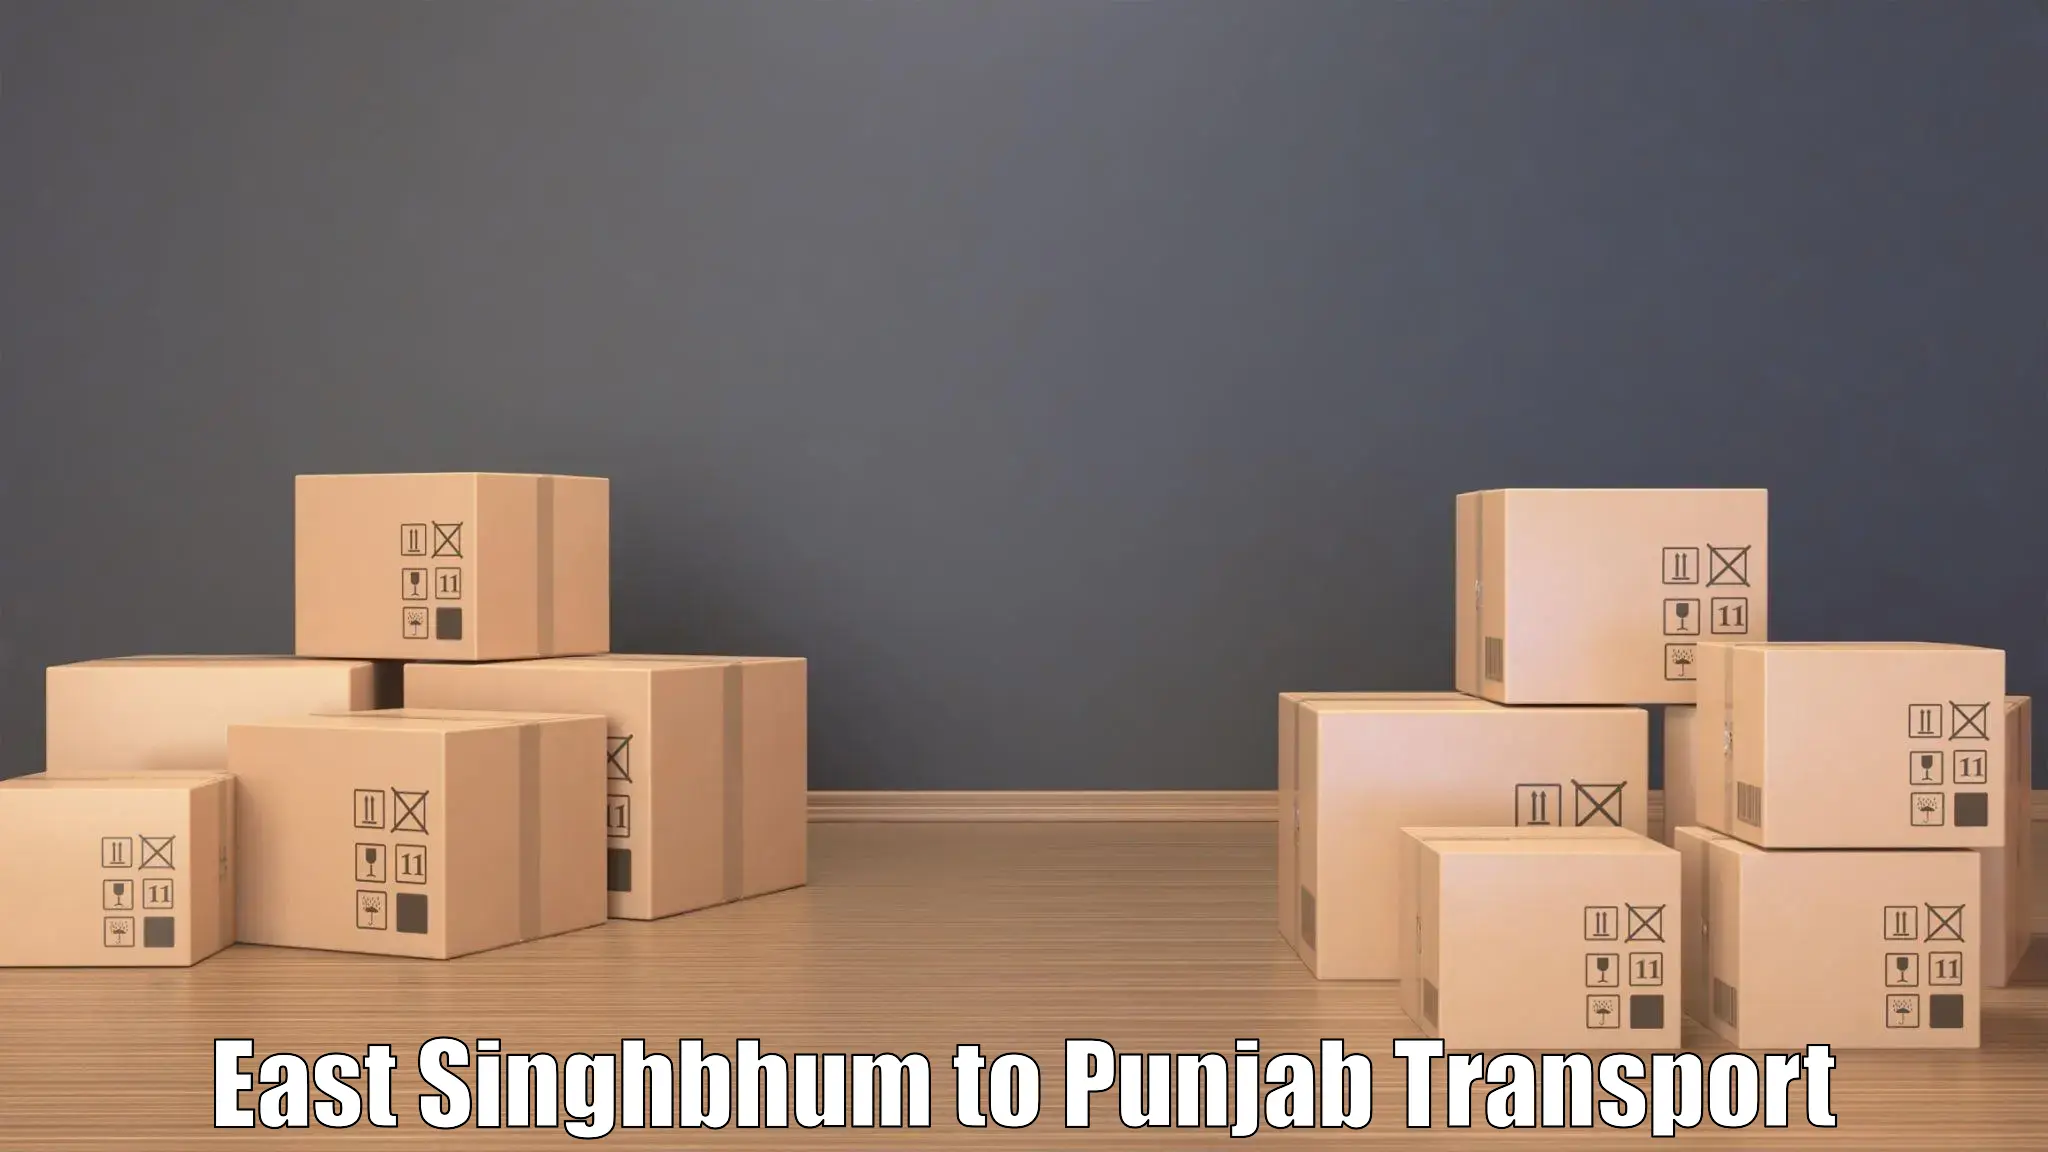 Daily parcel service transport East Singhbhum to Patiala